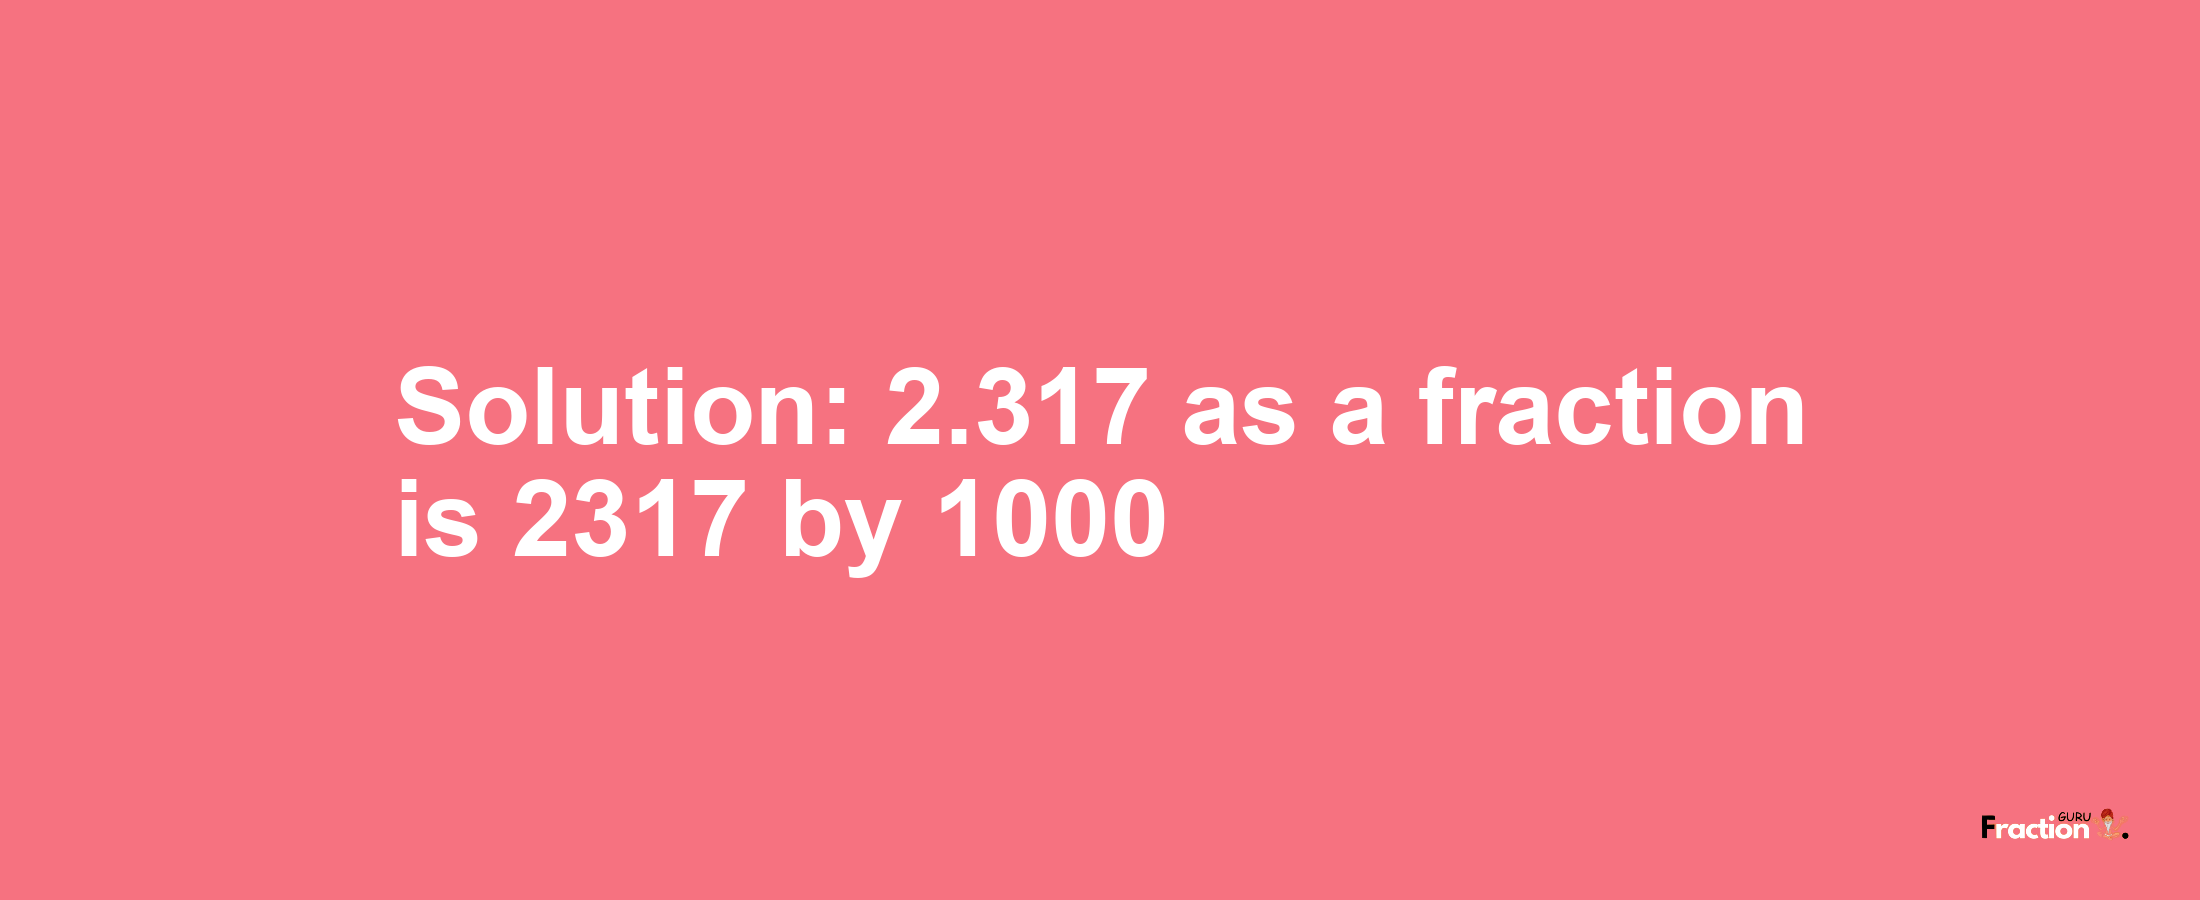 Solution:2.317 as a fraction is 2317/1000